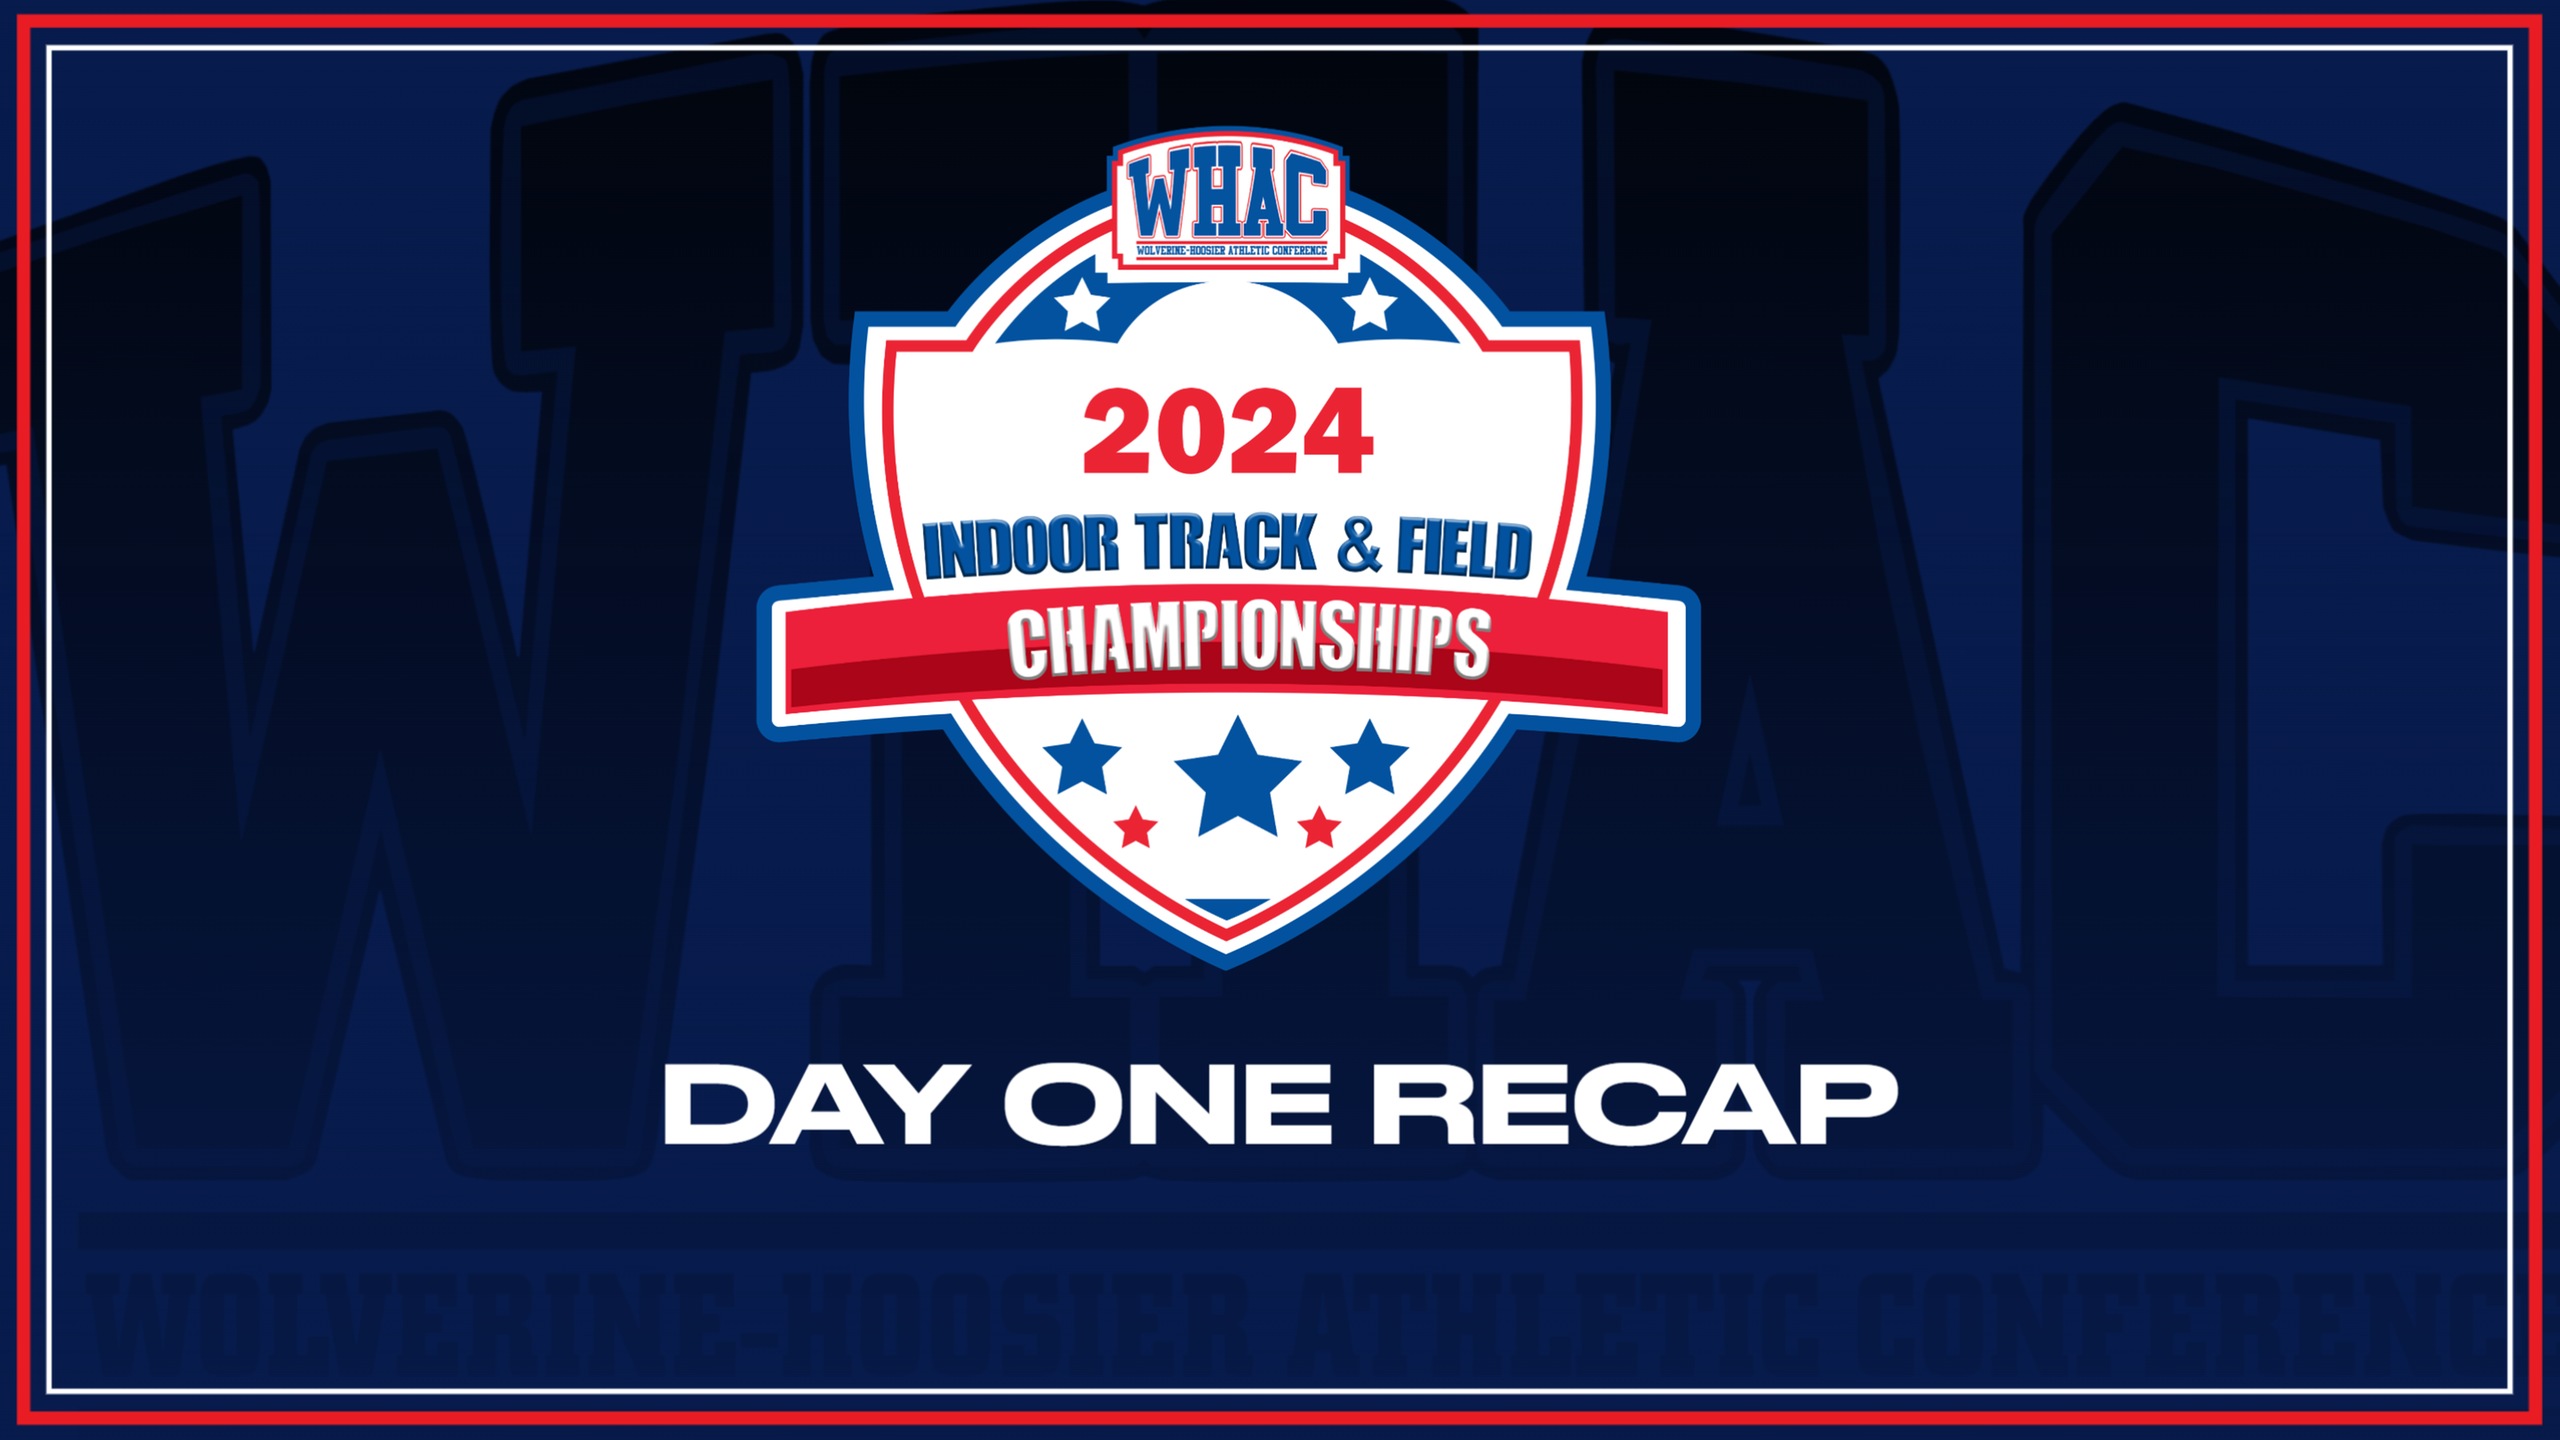 Day One of Indoor Track & Field Championships Complete